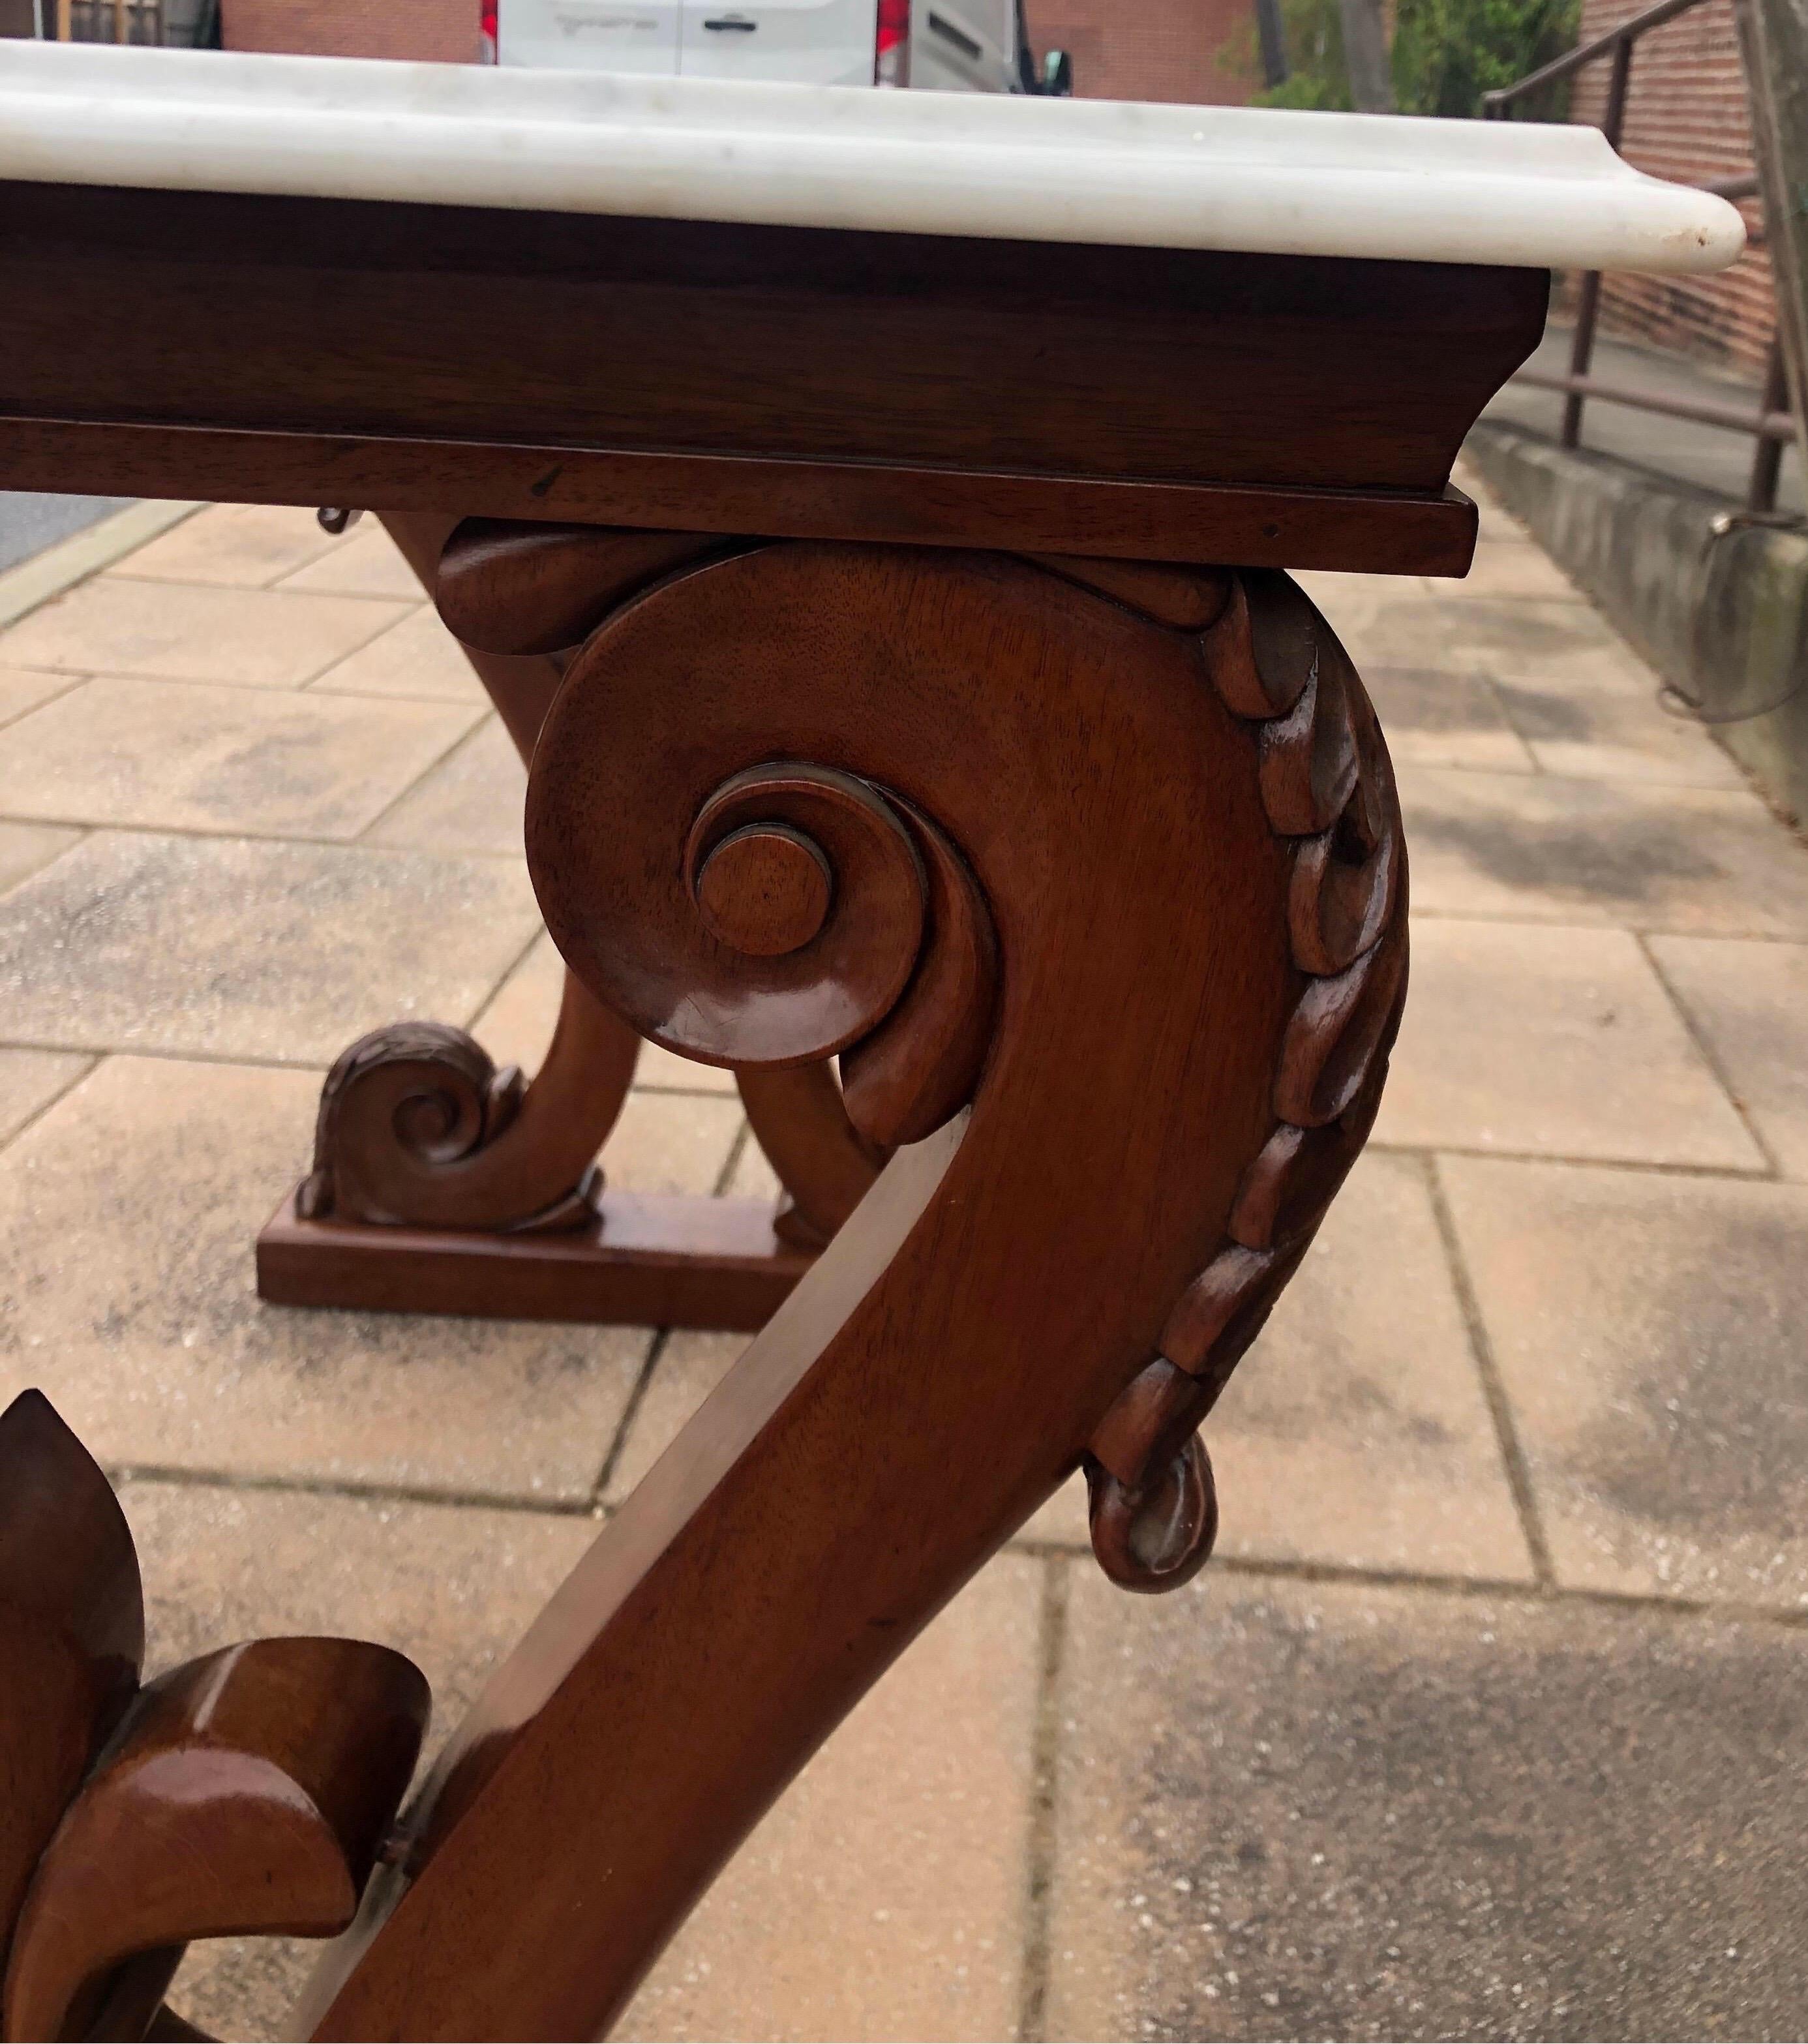 19th century Irish William IV Marble-Top Mahogany Hall Table with Fleur de Lys For Sale 8